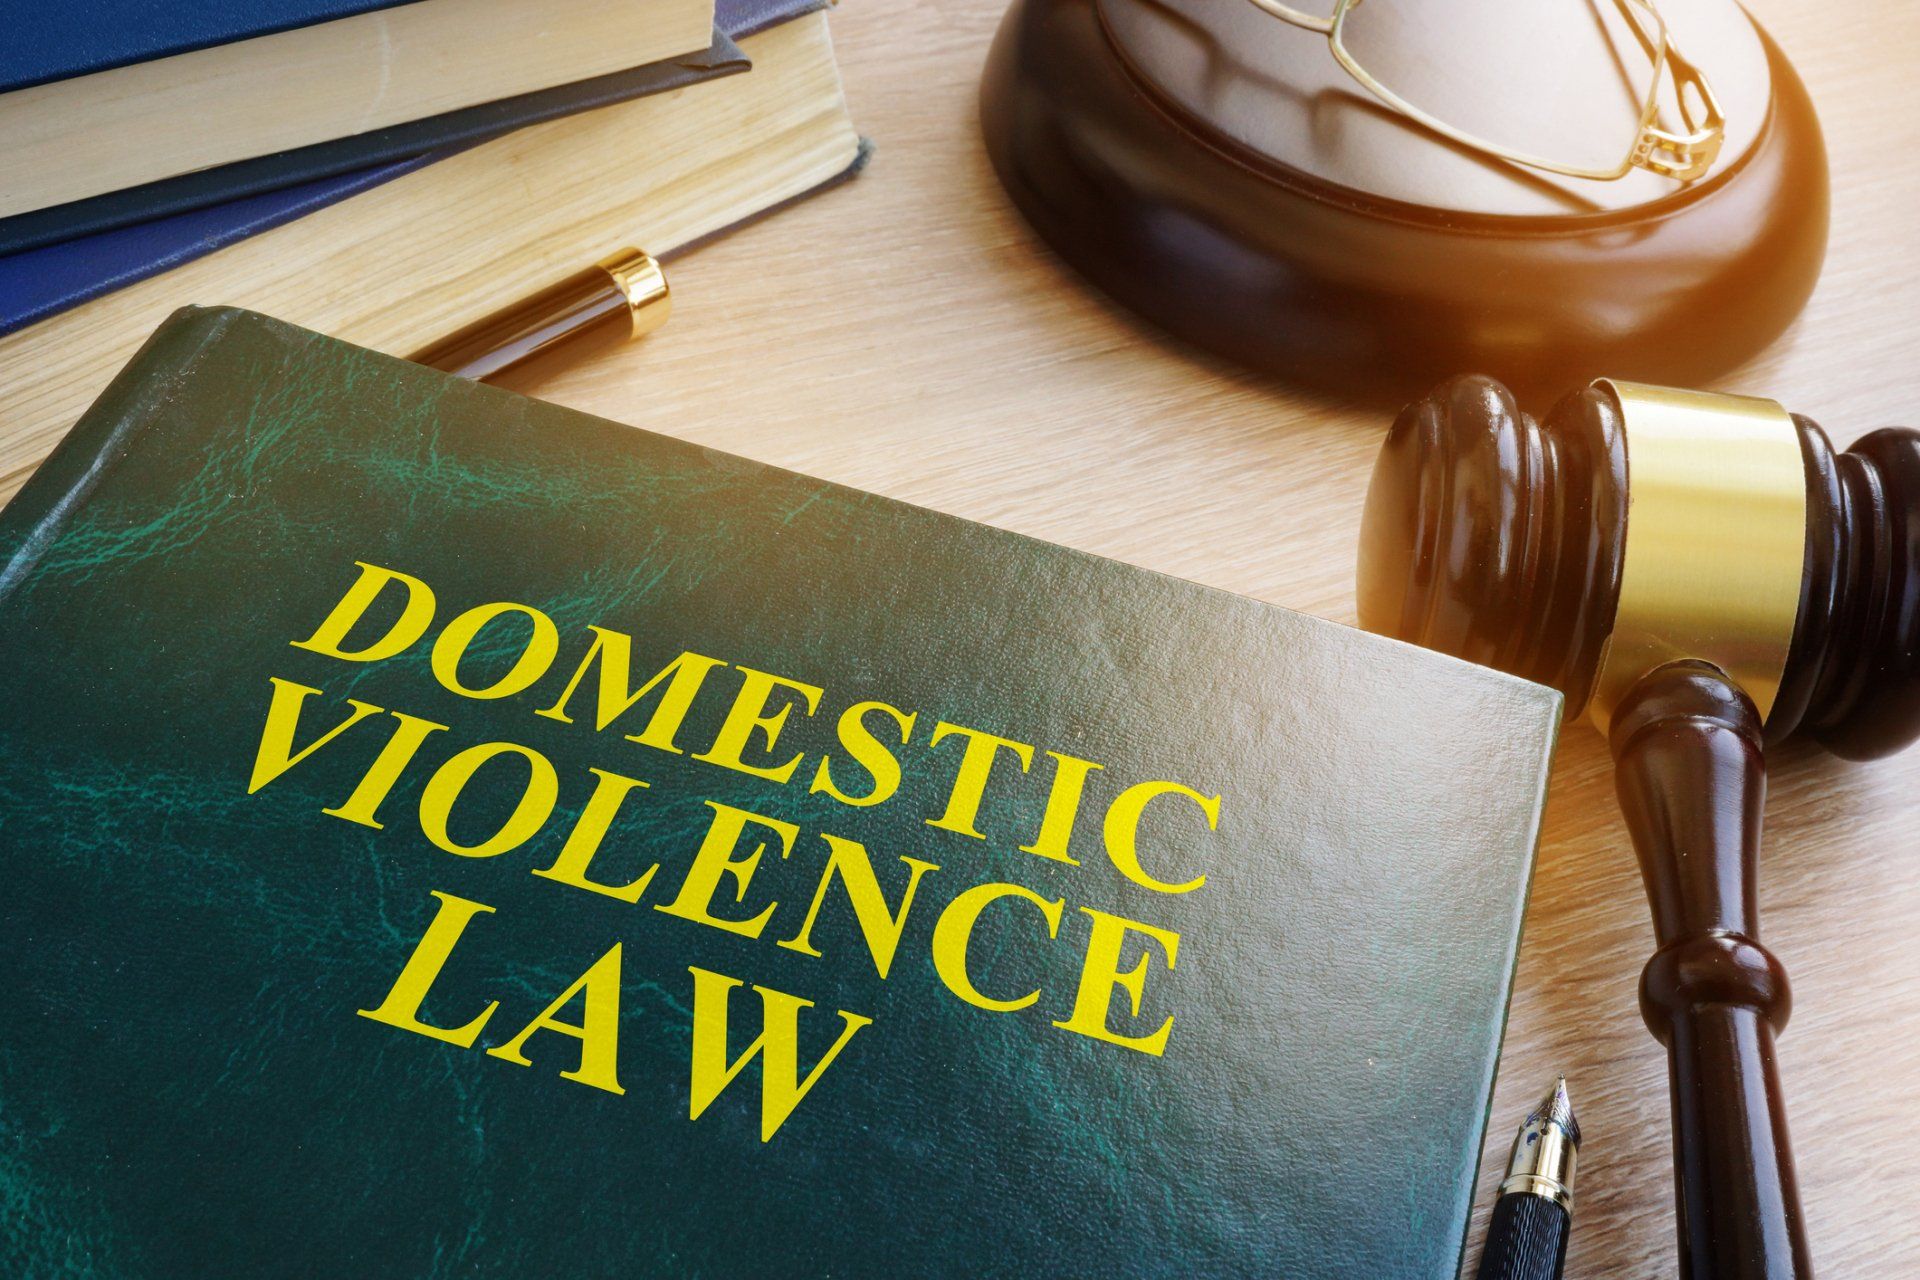 Domestic Violence Law on Table - Fort Worth, TX - Law Office of Virginia